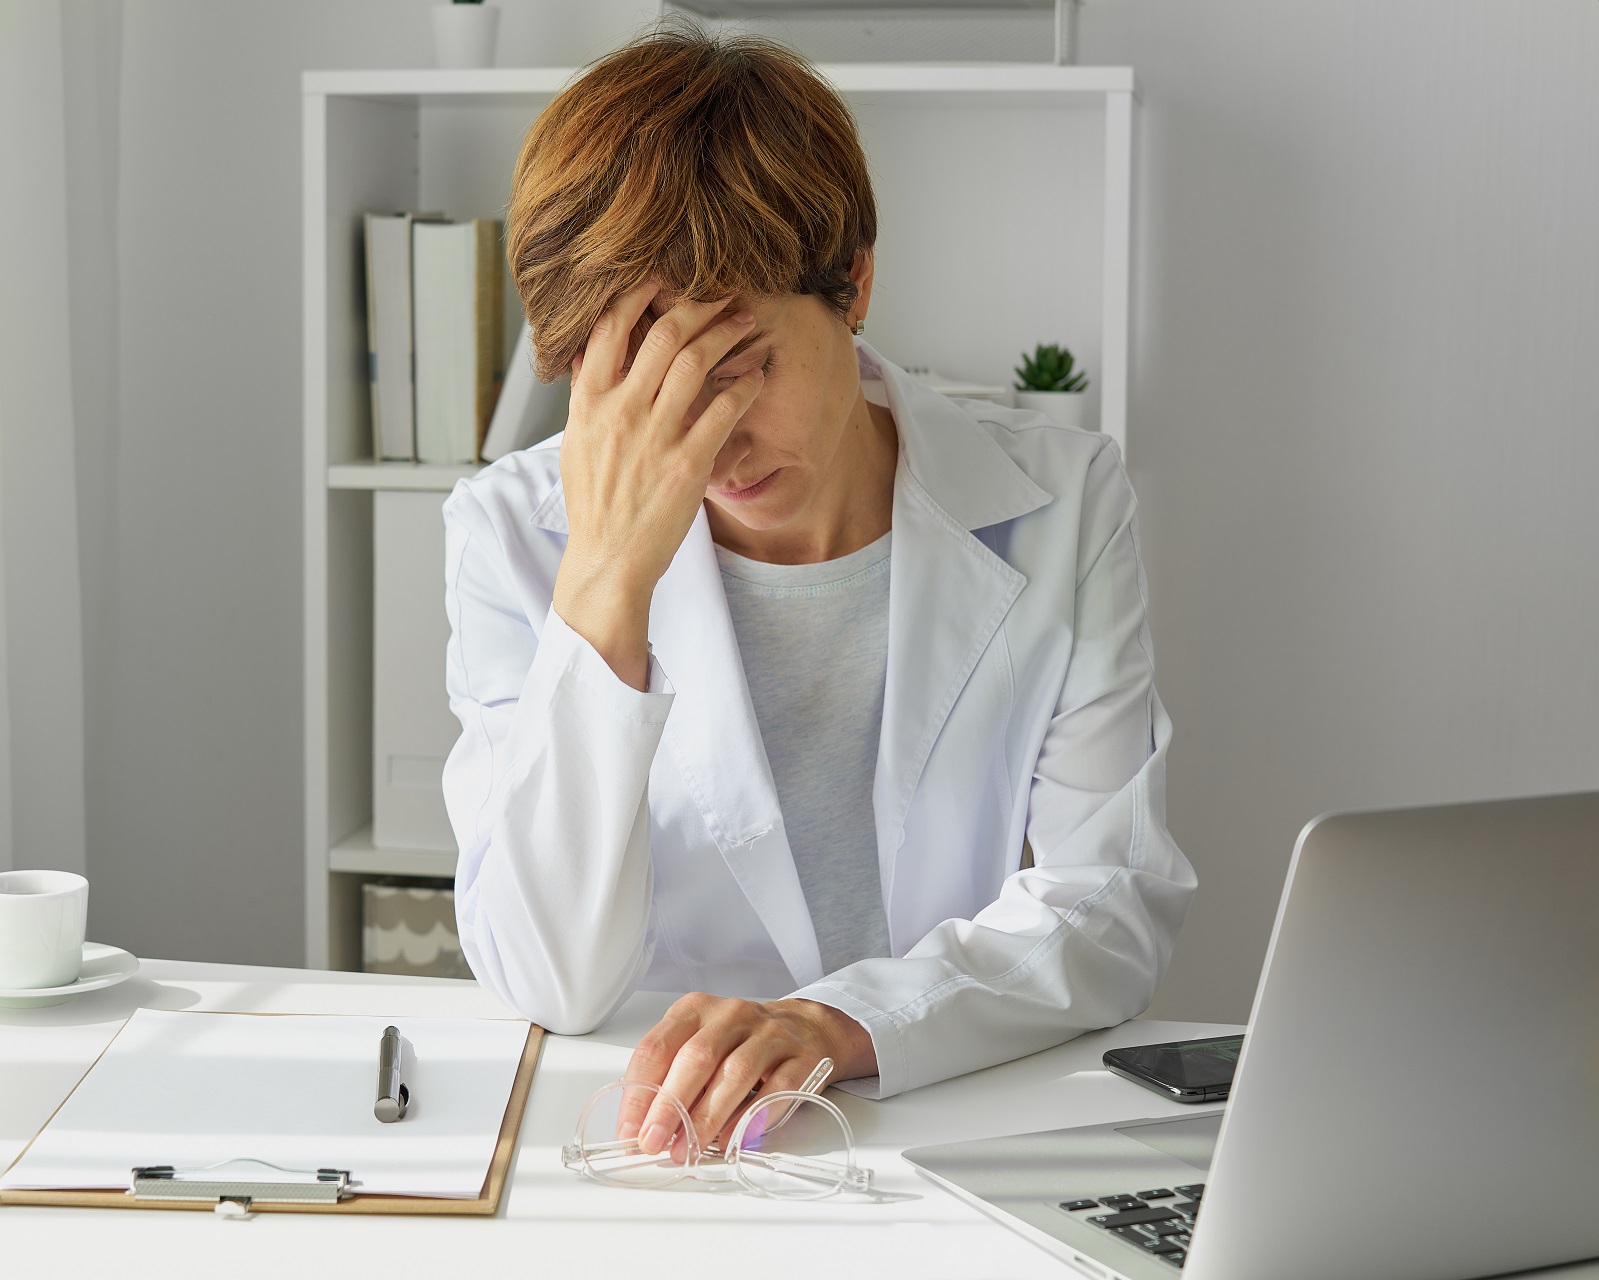 Physical therapist experiencing burnout due to patient documentation